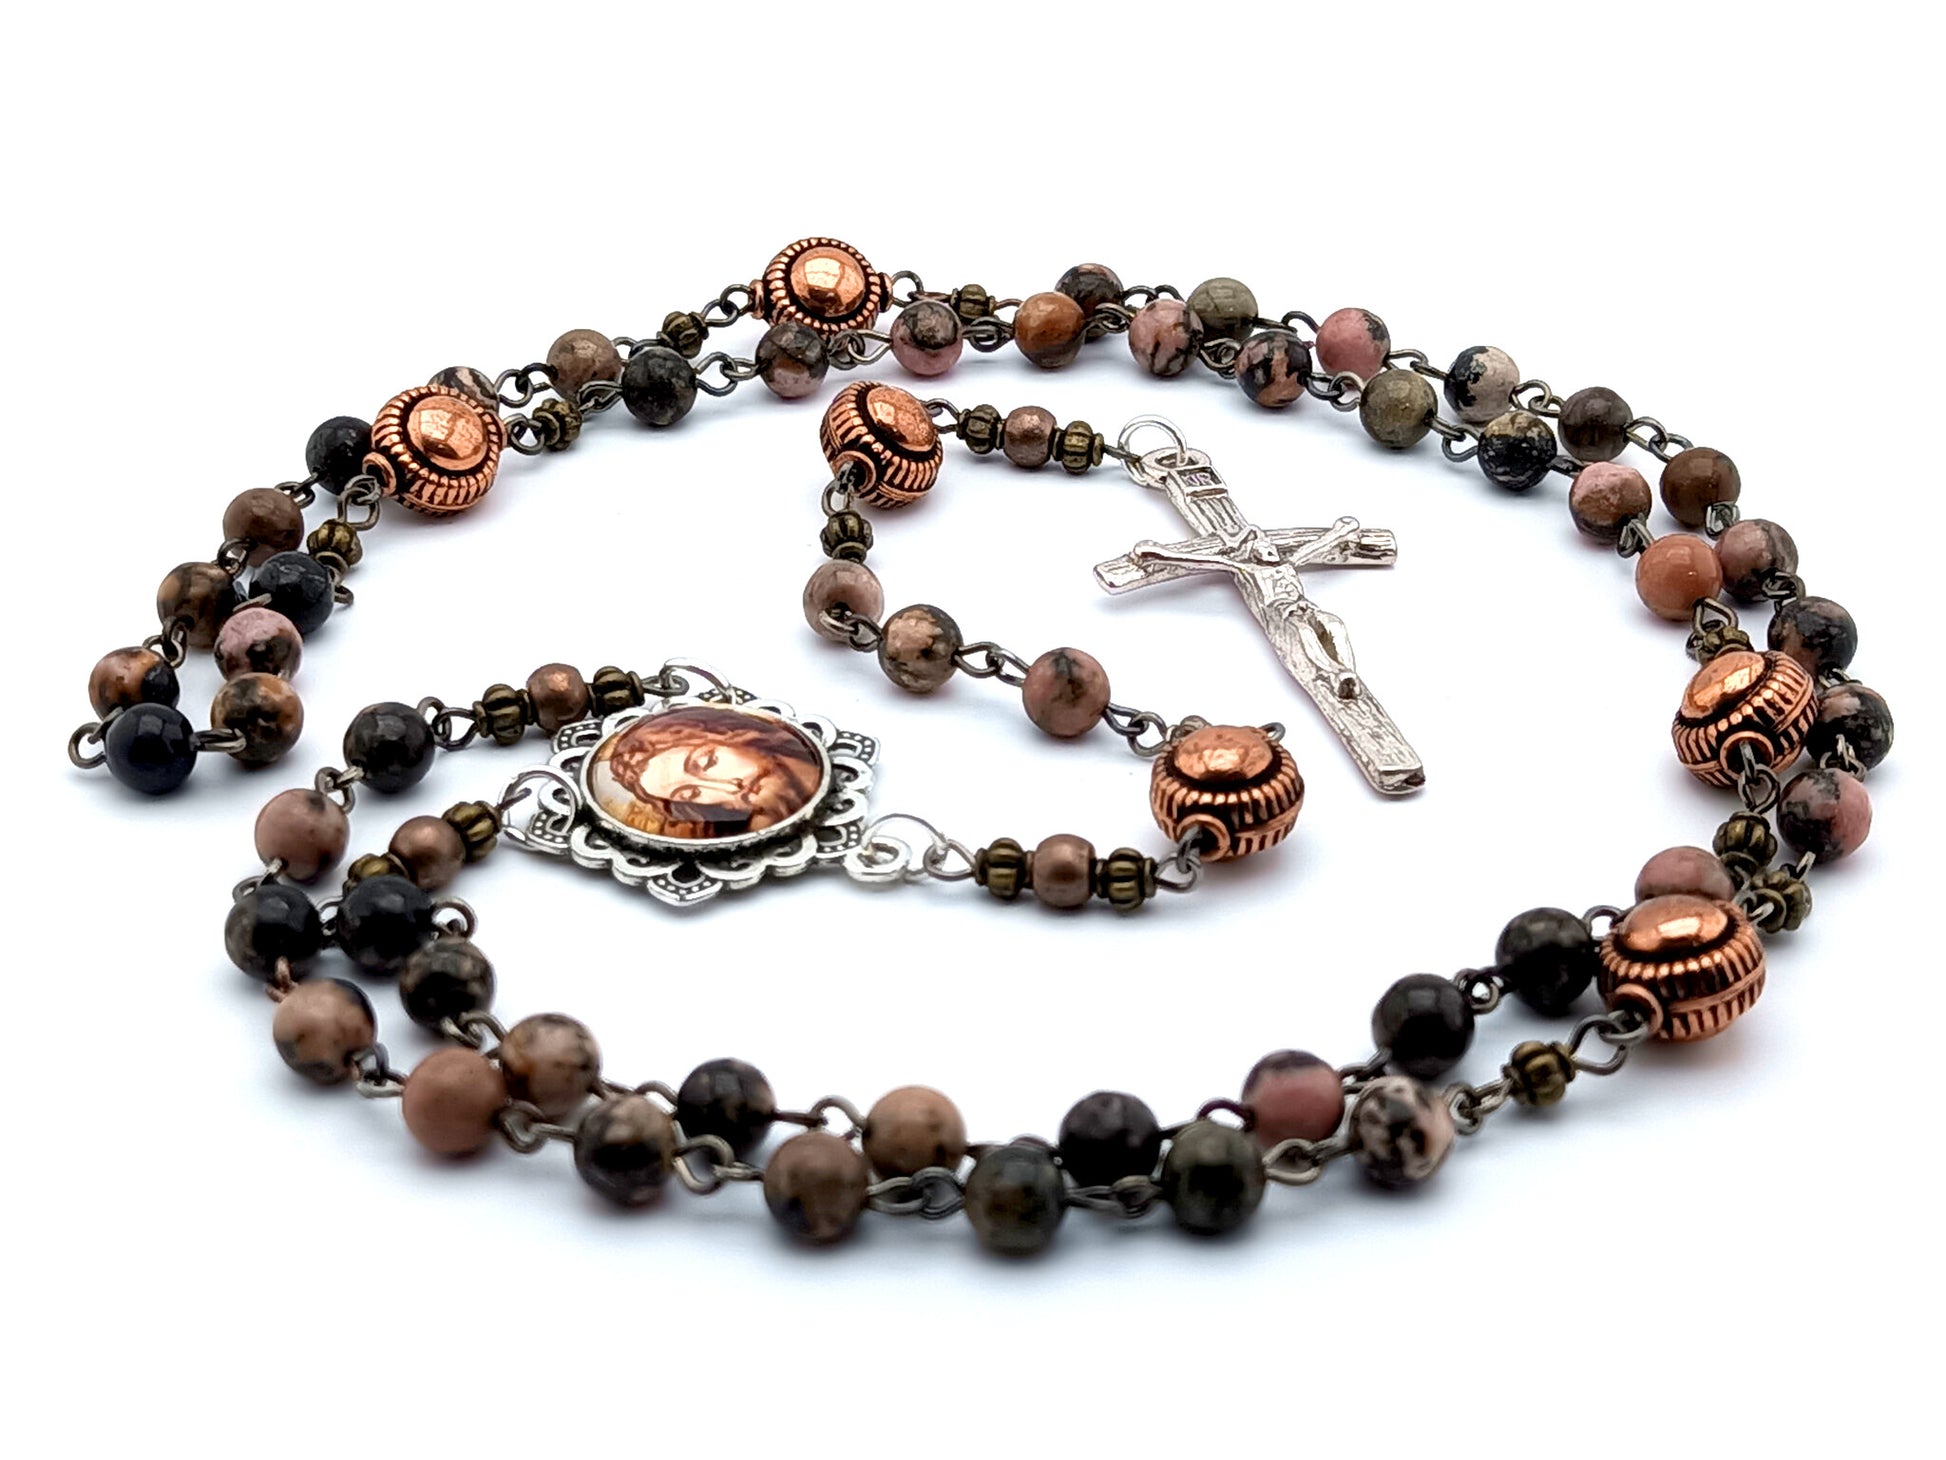 The Holy Face of Jesus unique rosary beads with rhodochrosite gemstone beads, copper pater beads, silver crucifix and picture centre medal.